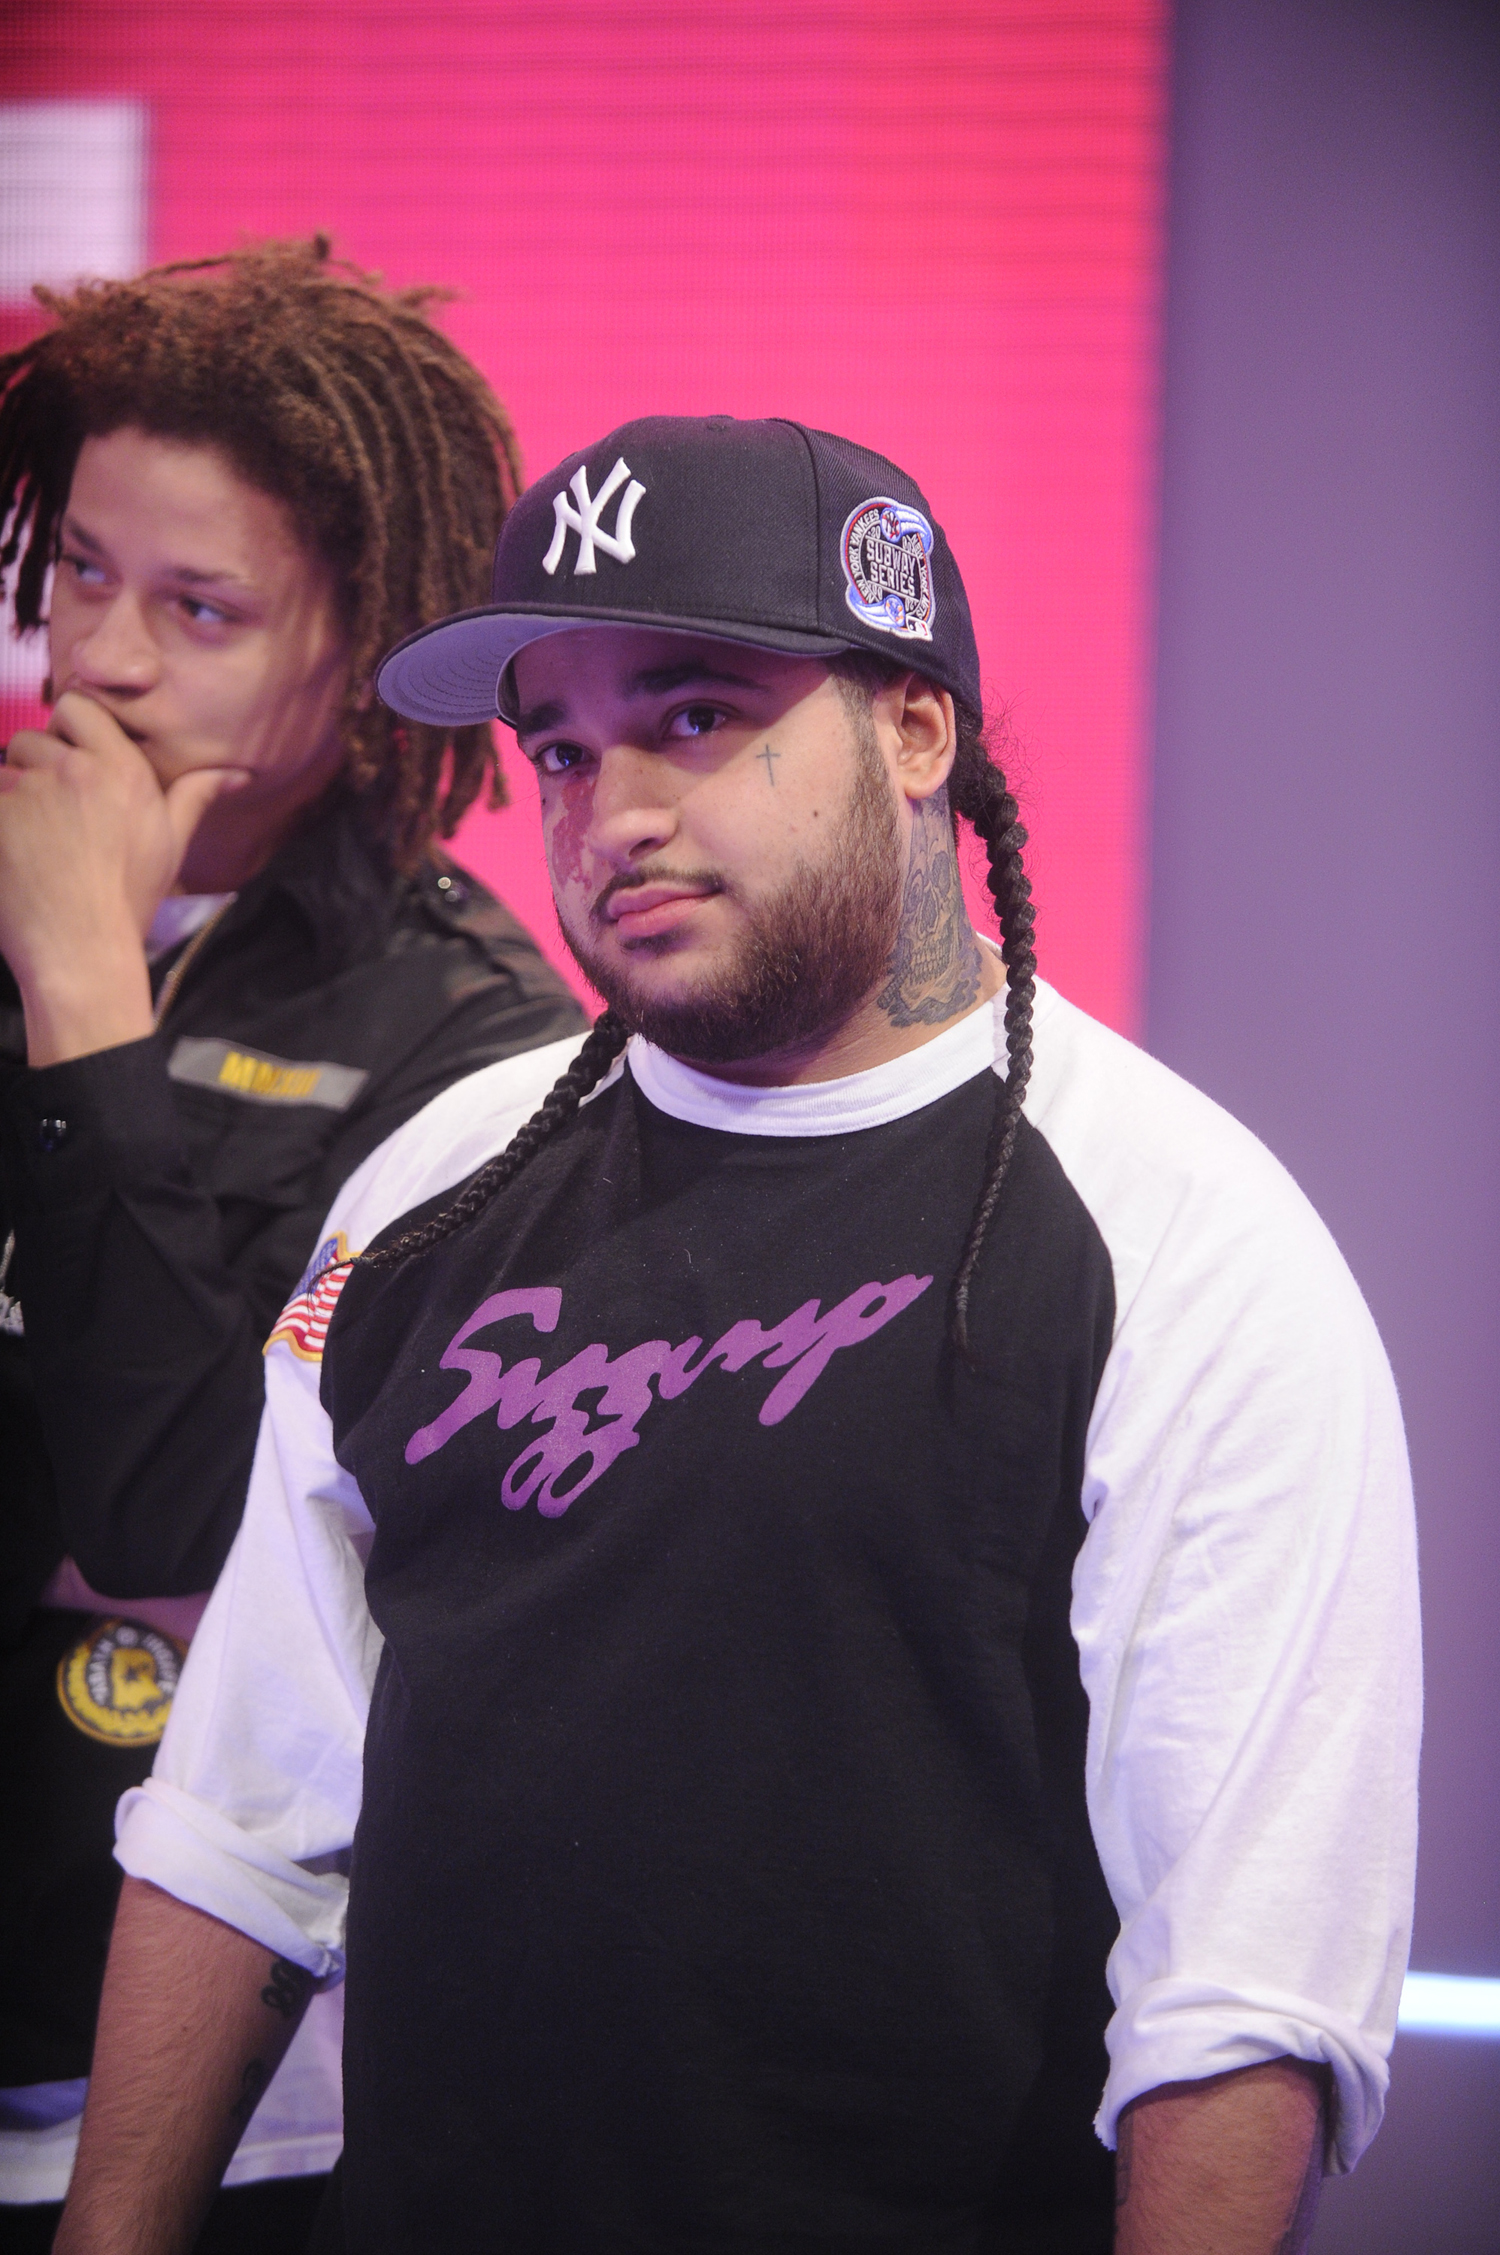 BET's 106 & Park With A$AP Mob, Schoolboy Q and Flo Rida